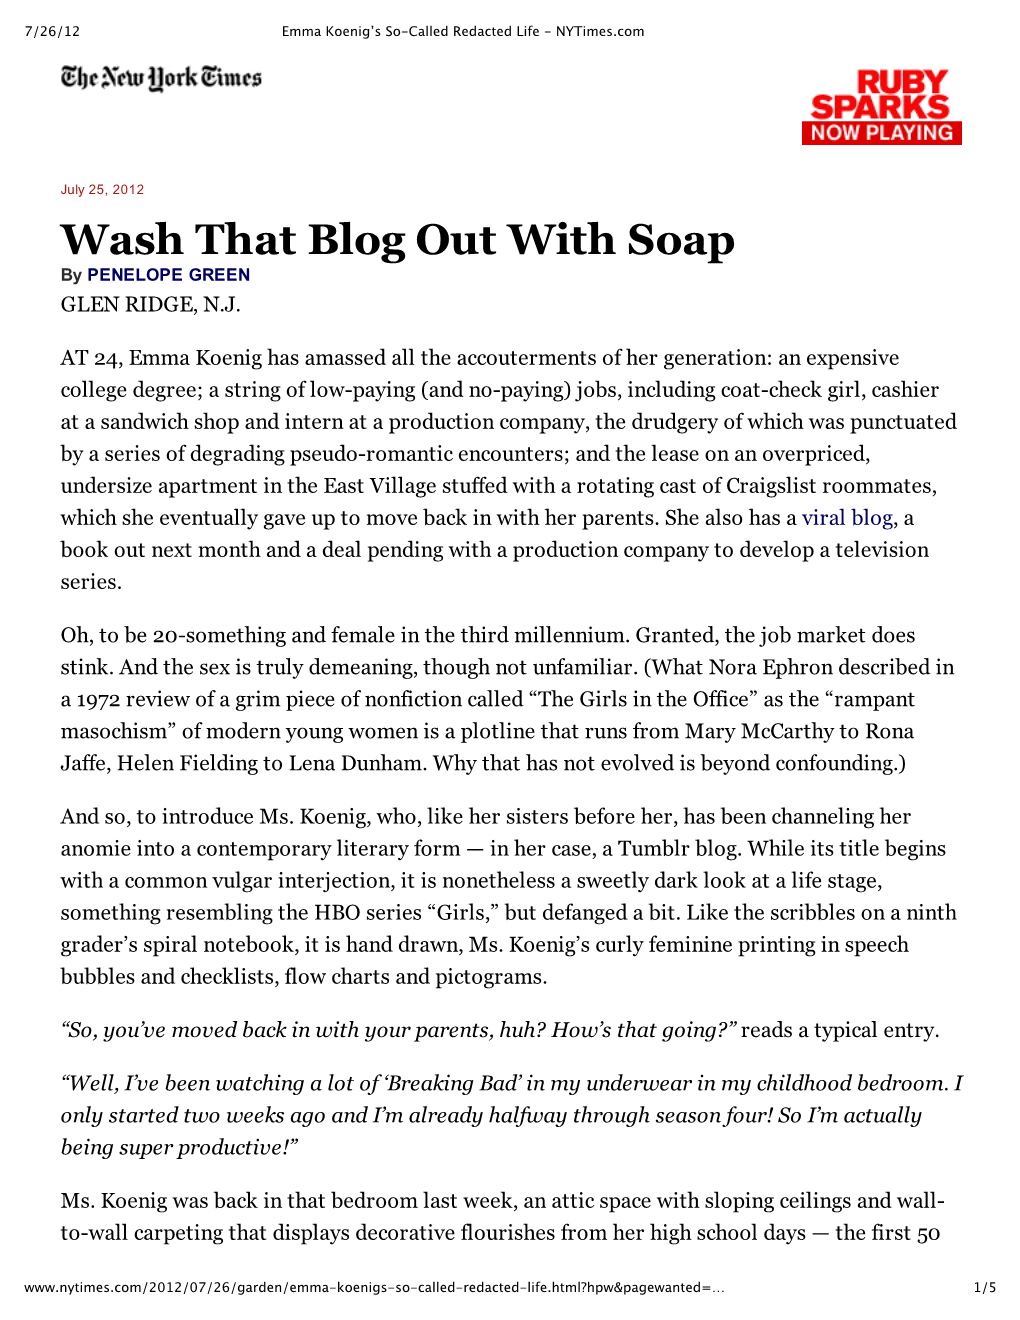 Wash That Blog out with Soap by PENELOPE GREEN GLEN RIDGE, N.J